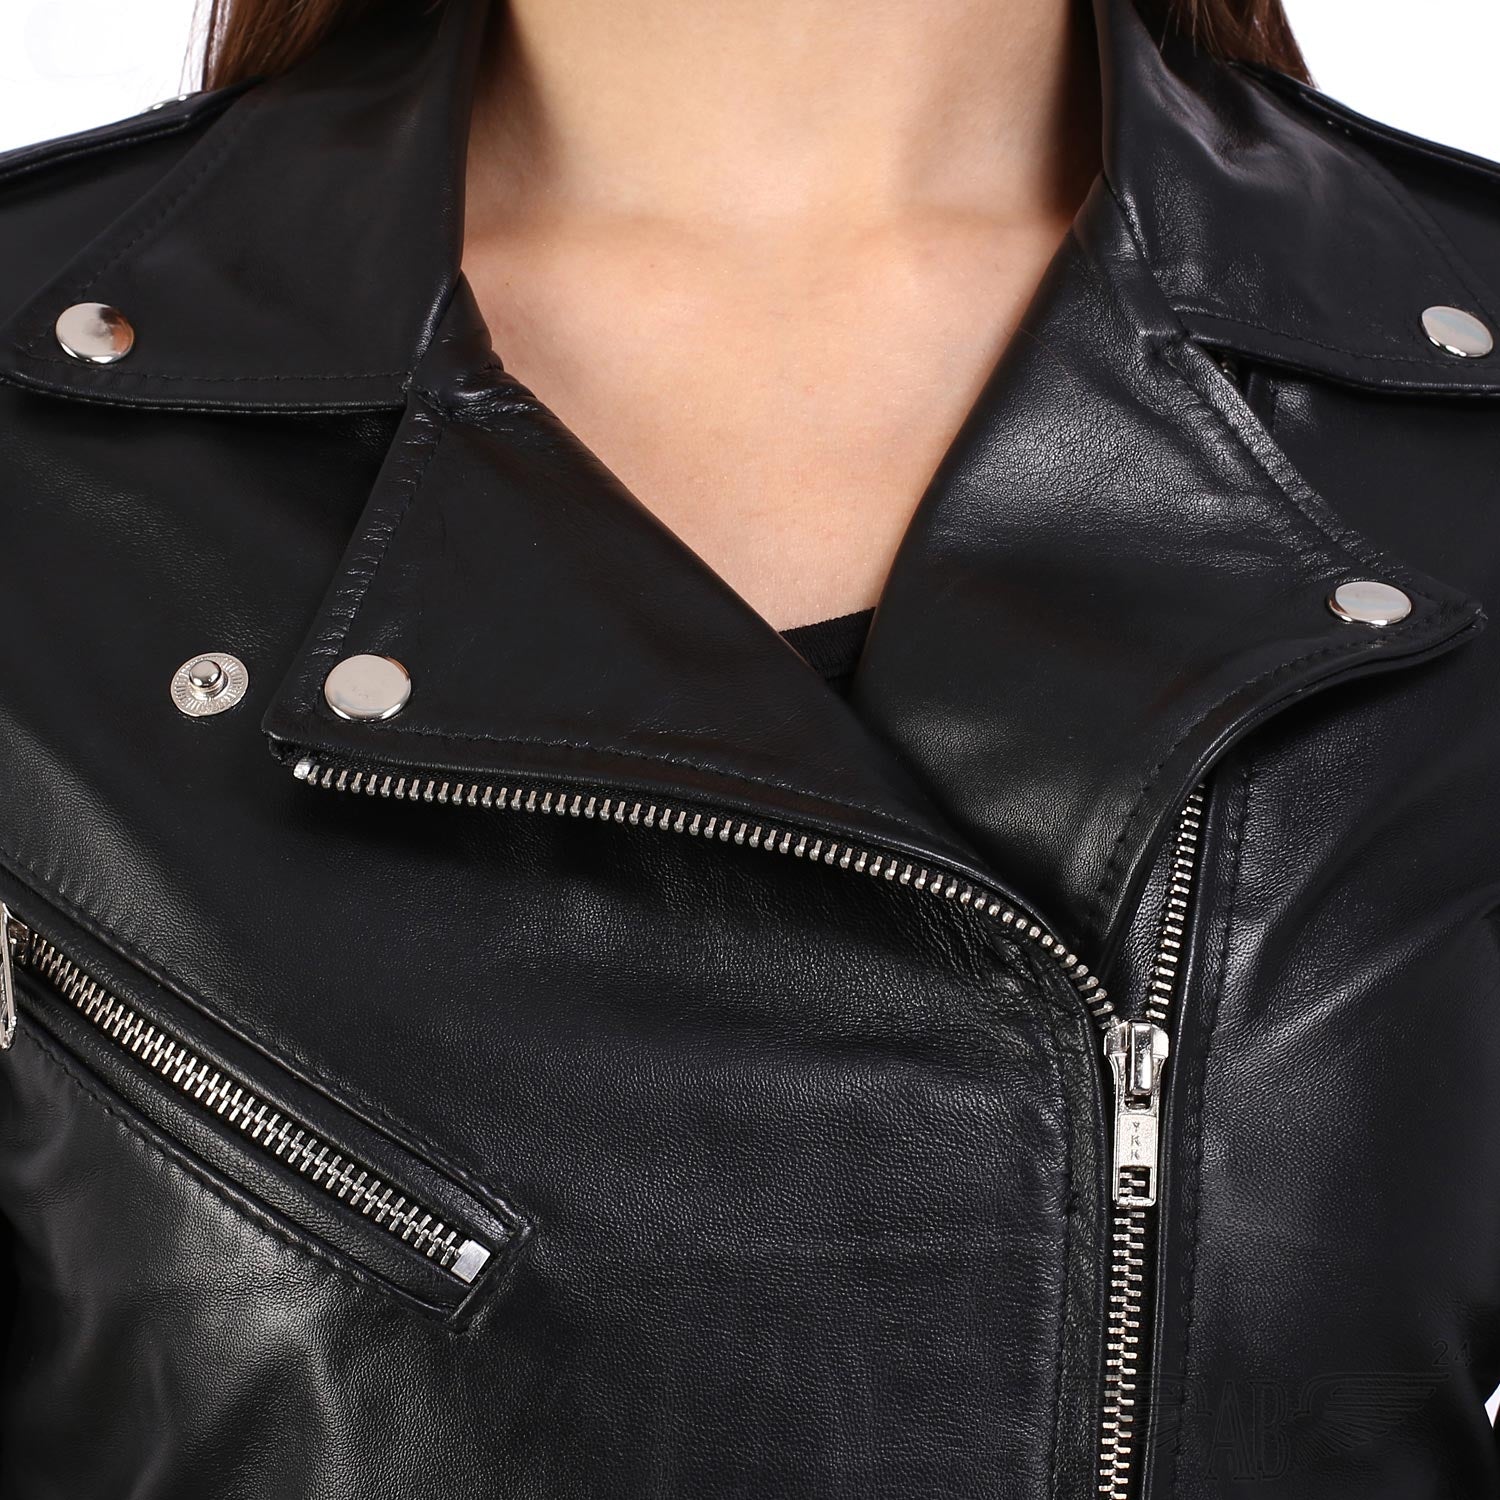 Close neck image  of GREASE PERFECTO BIKER JACKET WOMENS is  displayed.